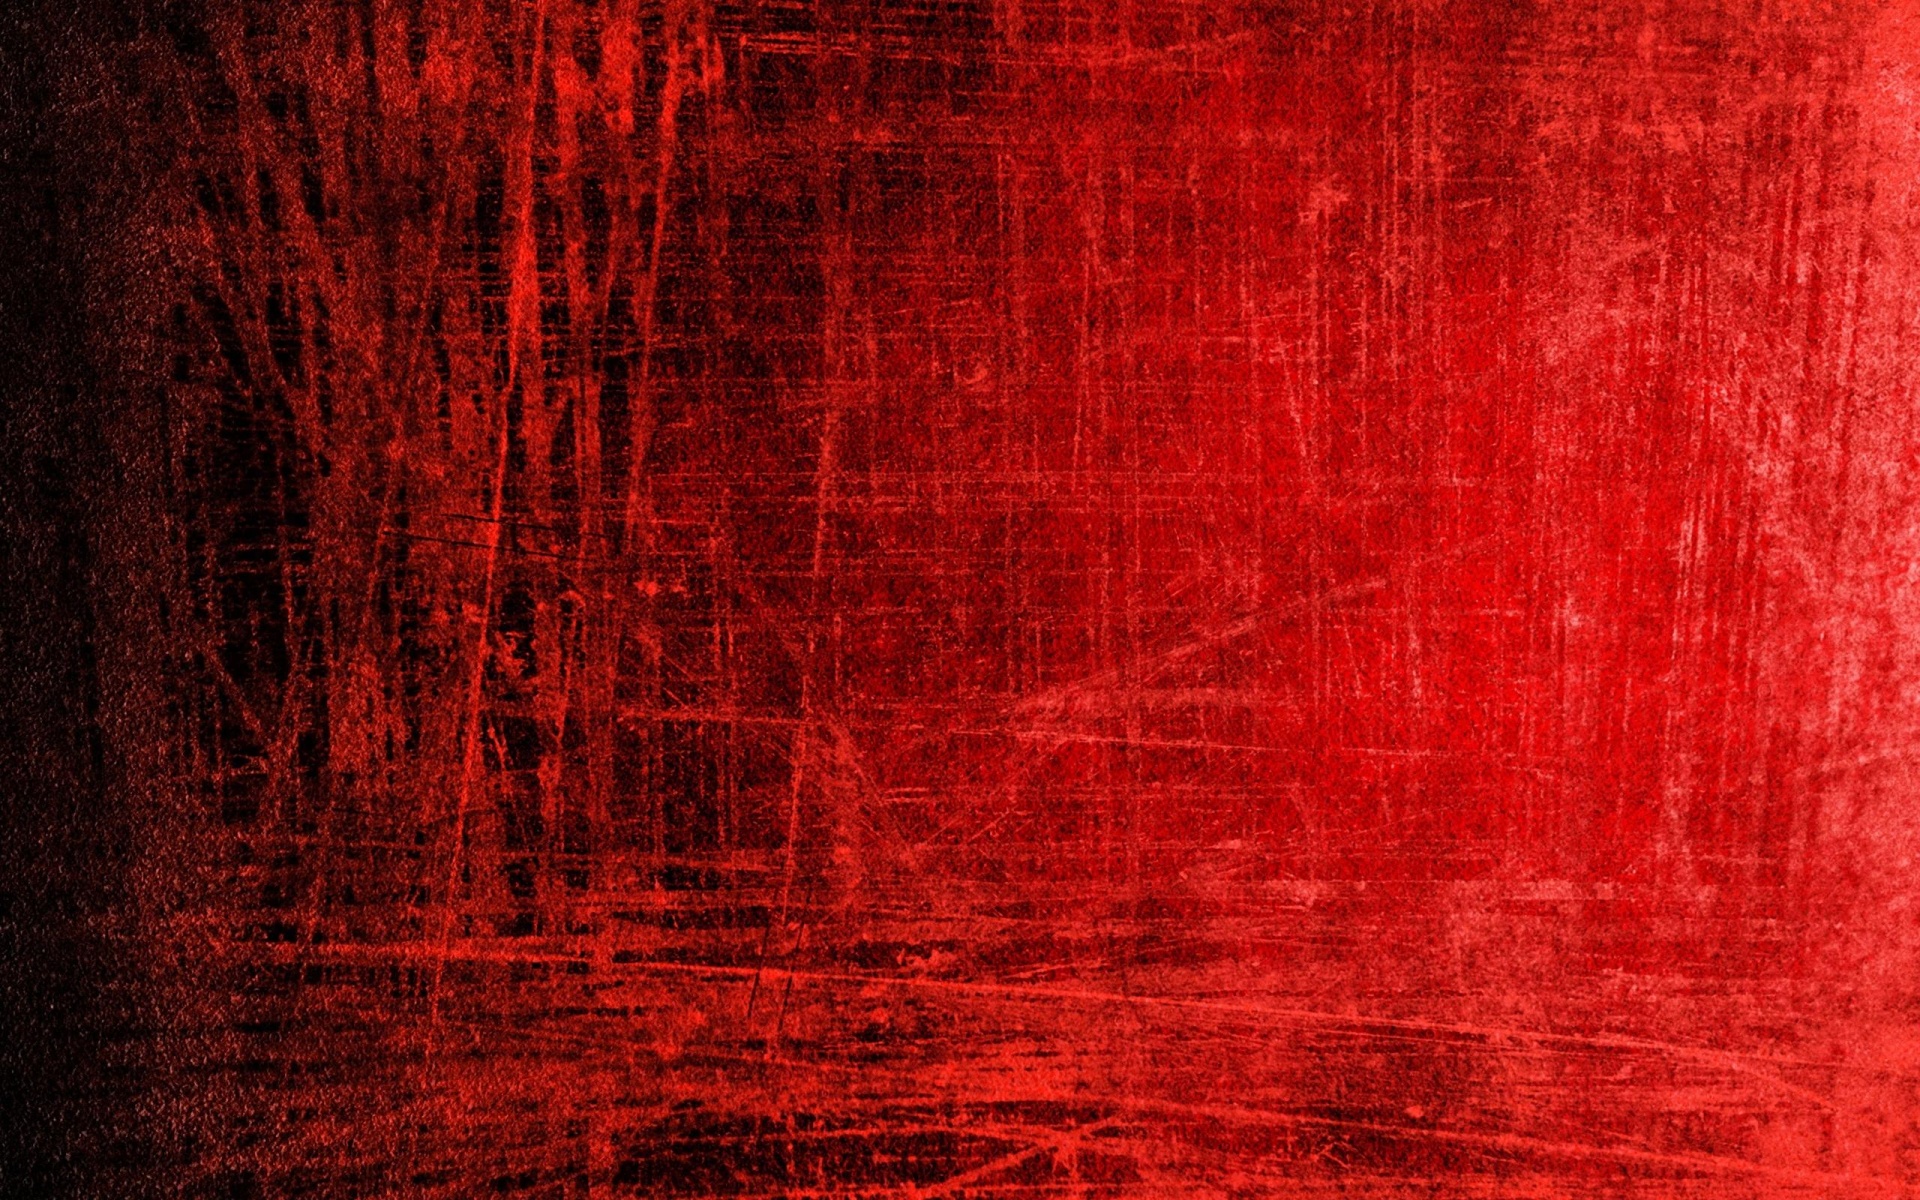 Red HD Wallpaper | Background Image | 1920x1200 | ID ...